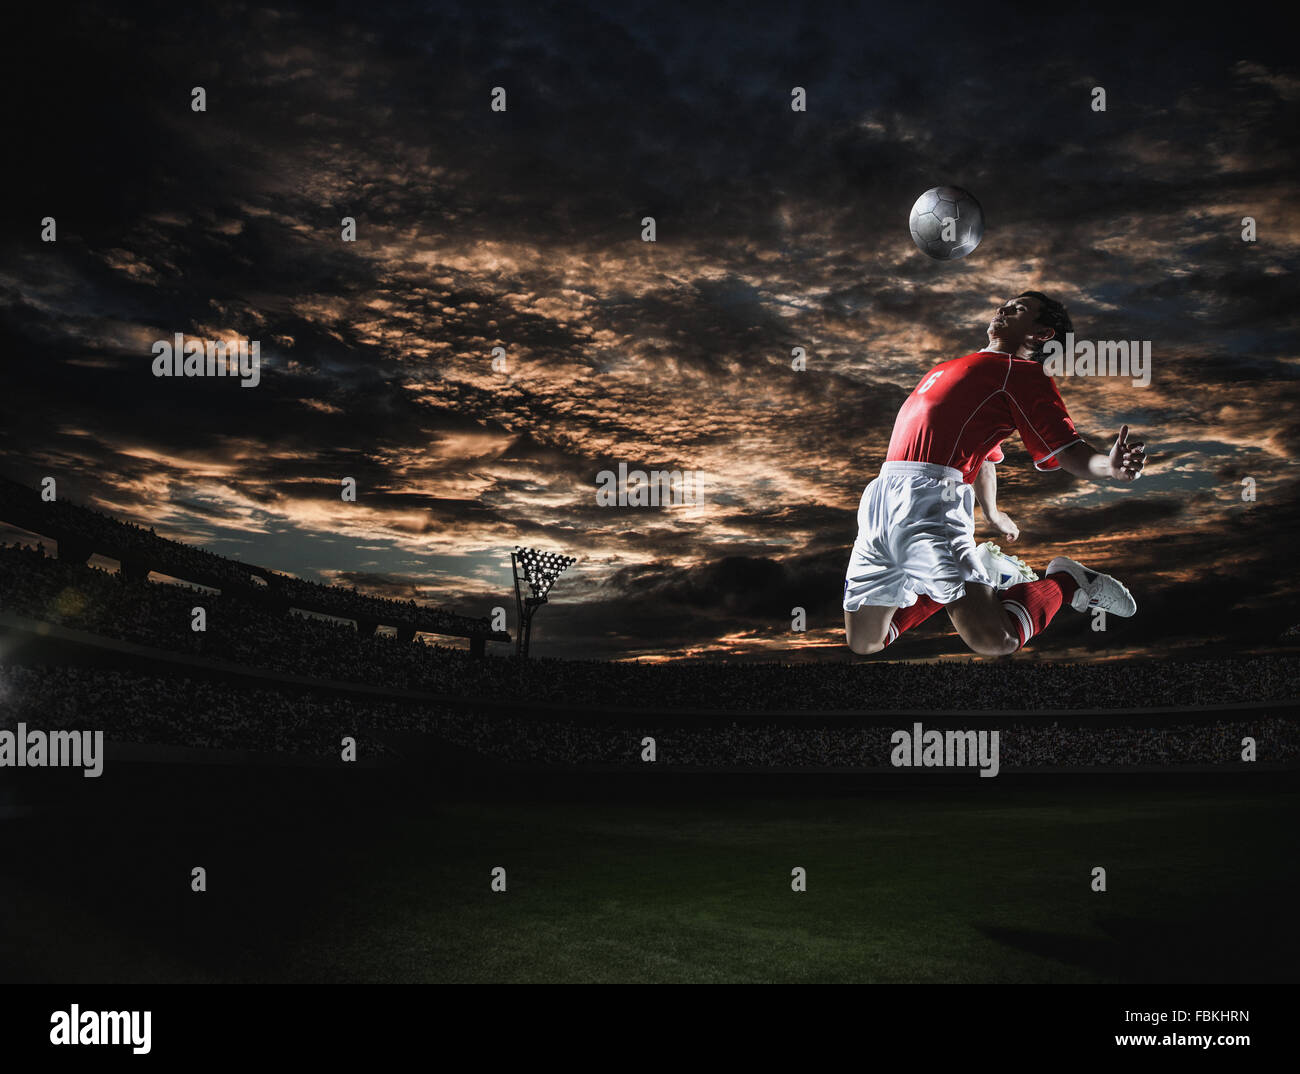 Soccer player in dramatic action Stock Photo